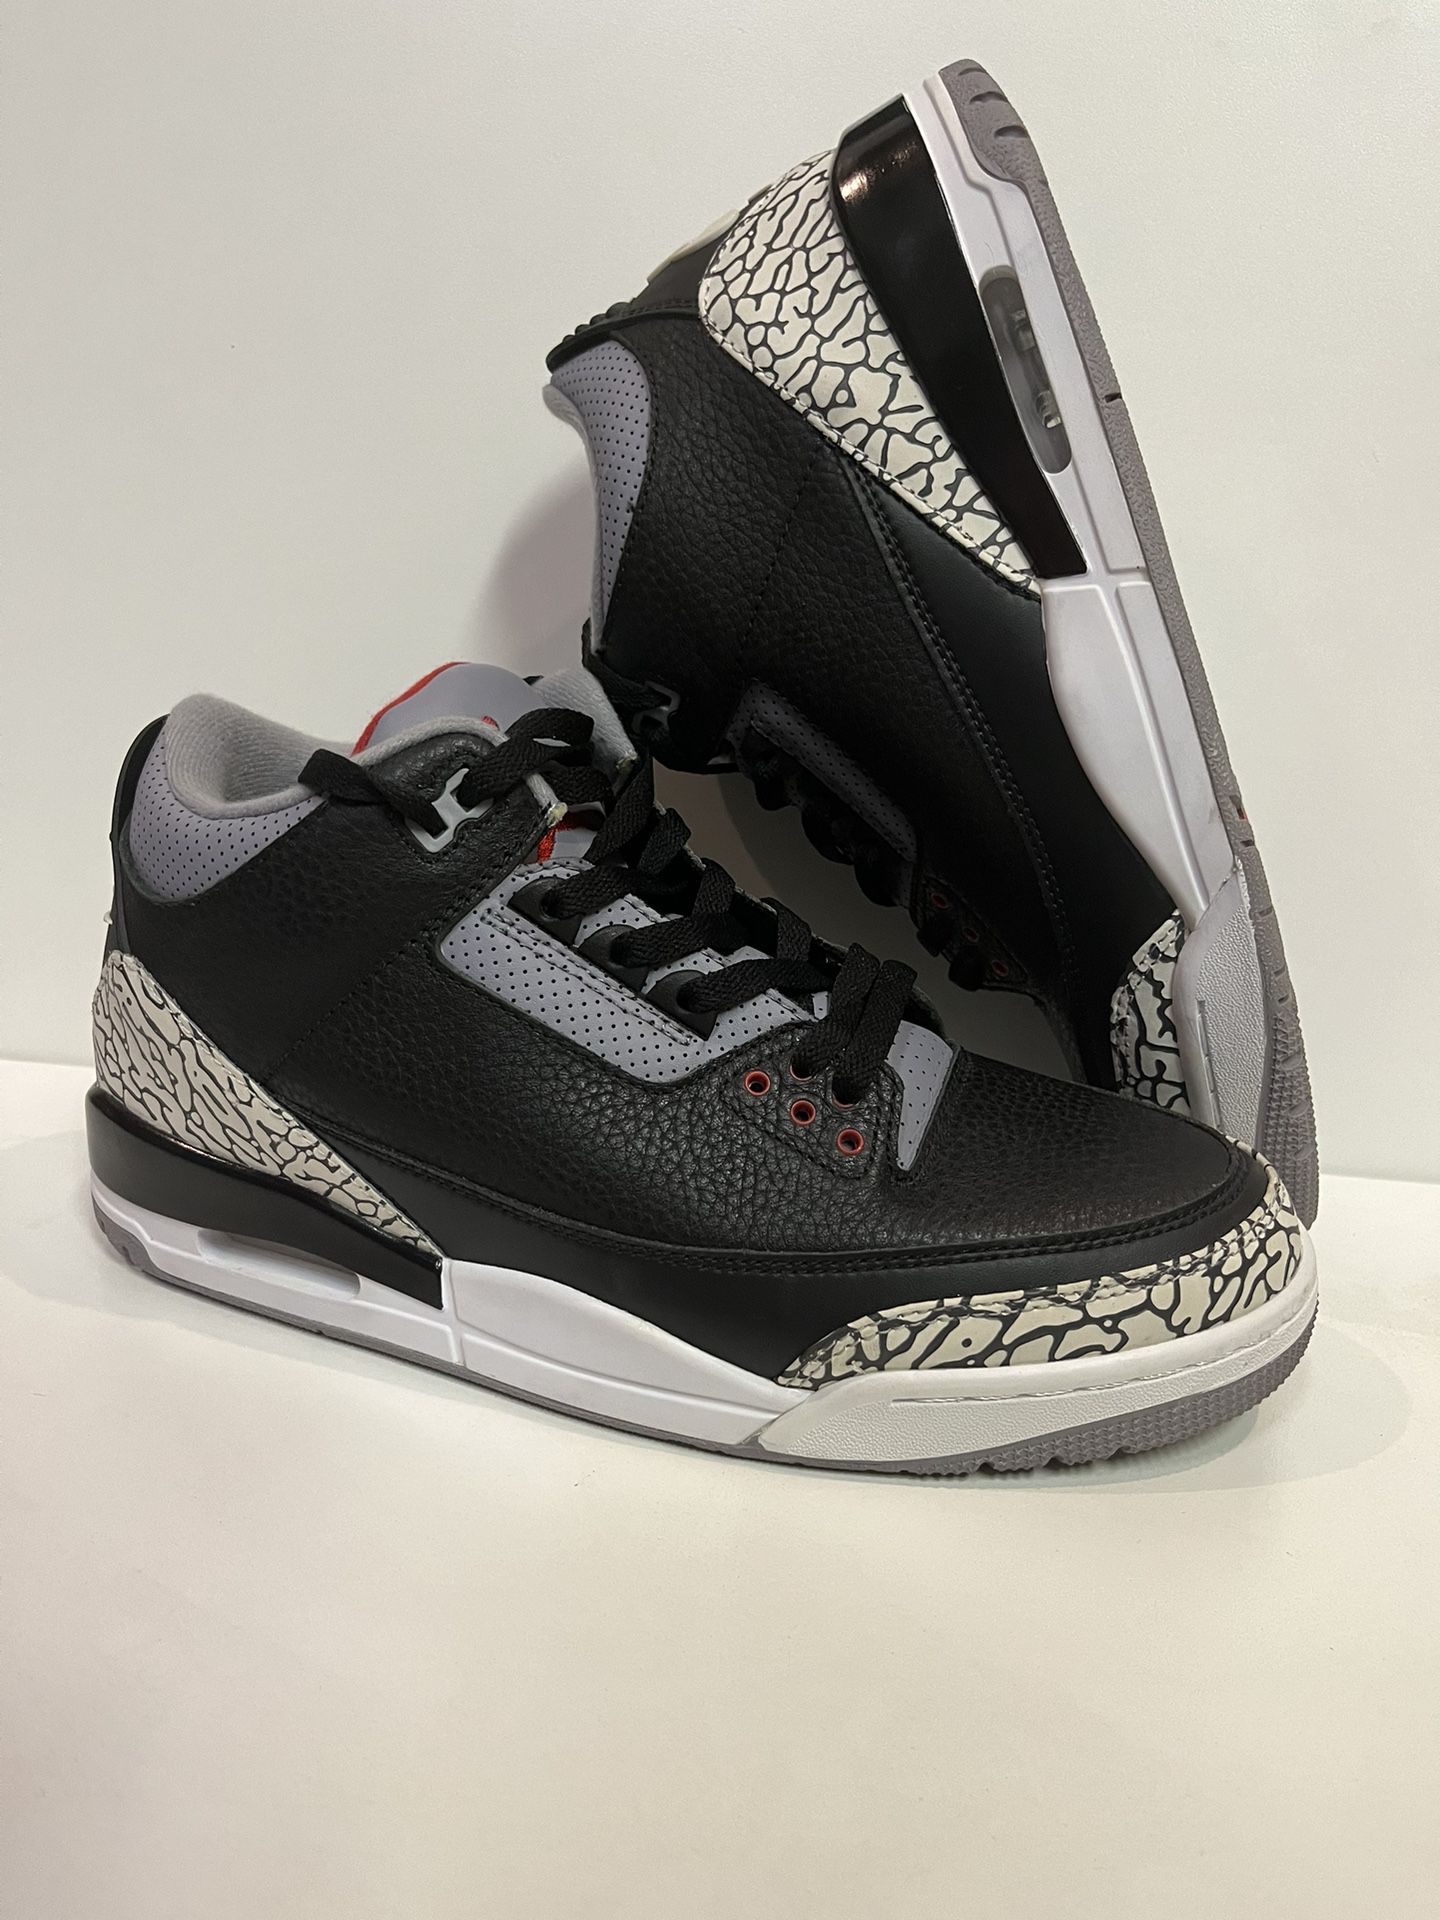 JORDAN 3 BLACK CEMENT SIZE 10 *MESSAGE BEFORE BUYING*